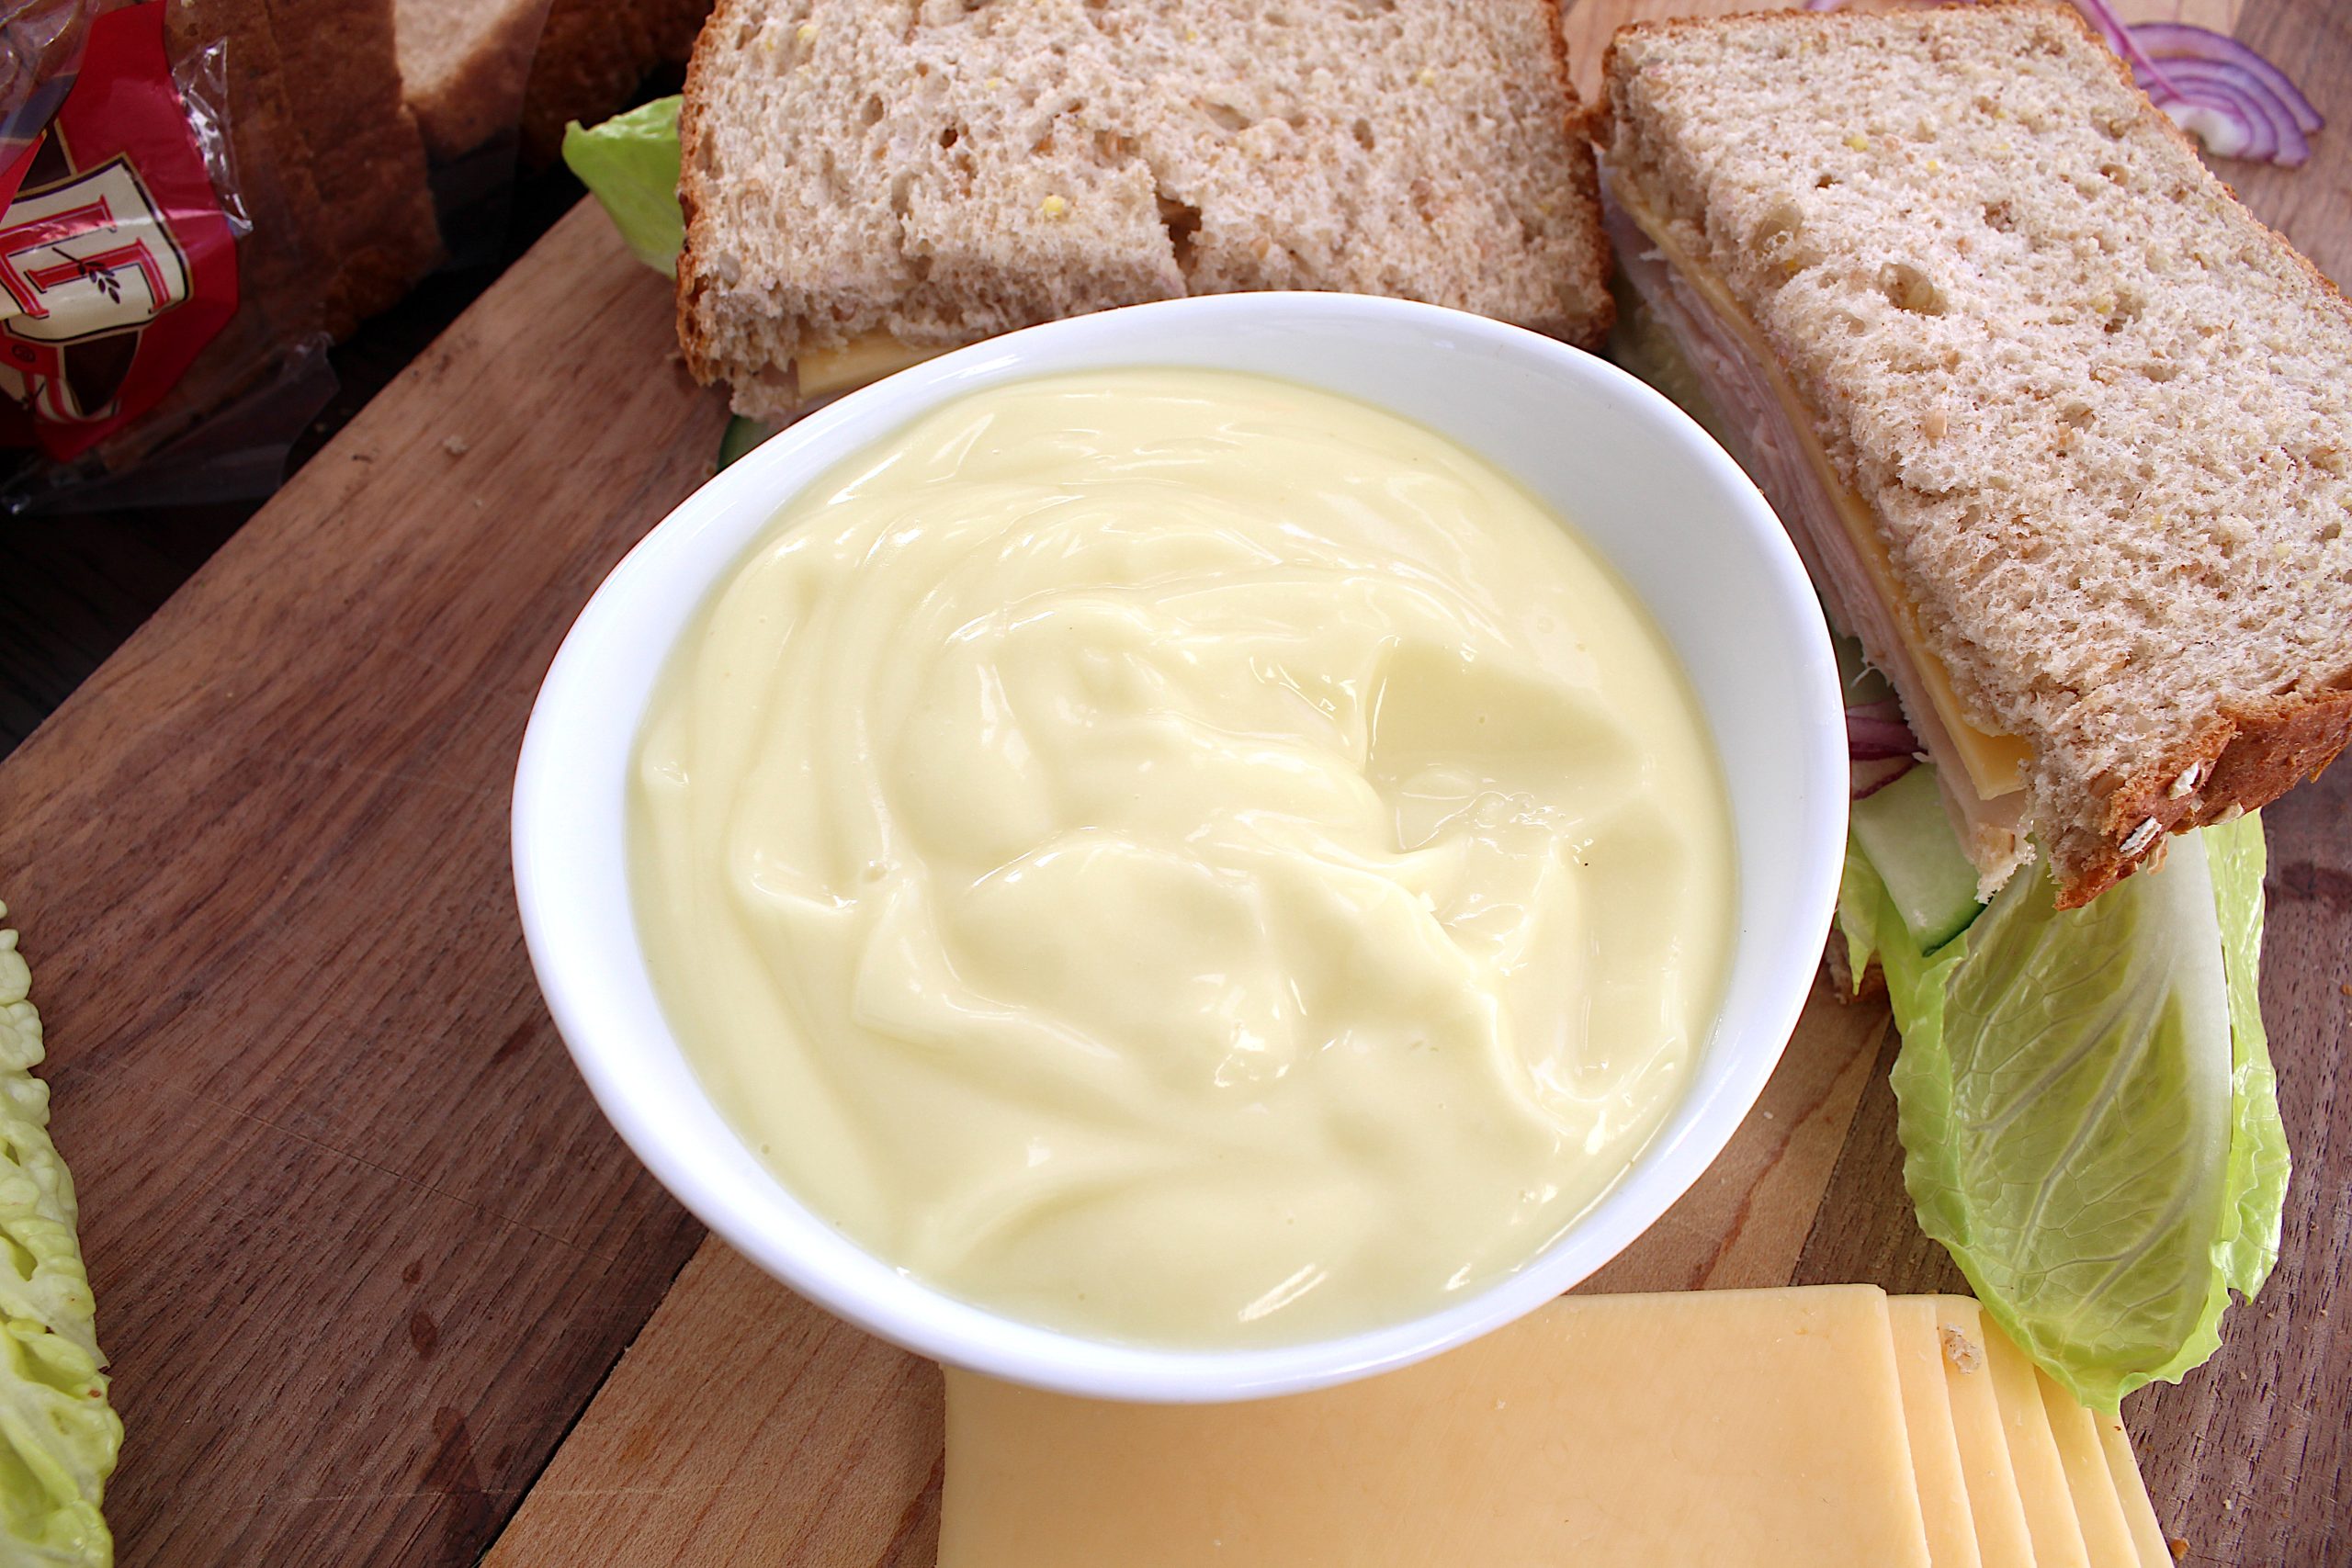 Probiotic Fermented Mayonnaise